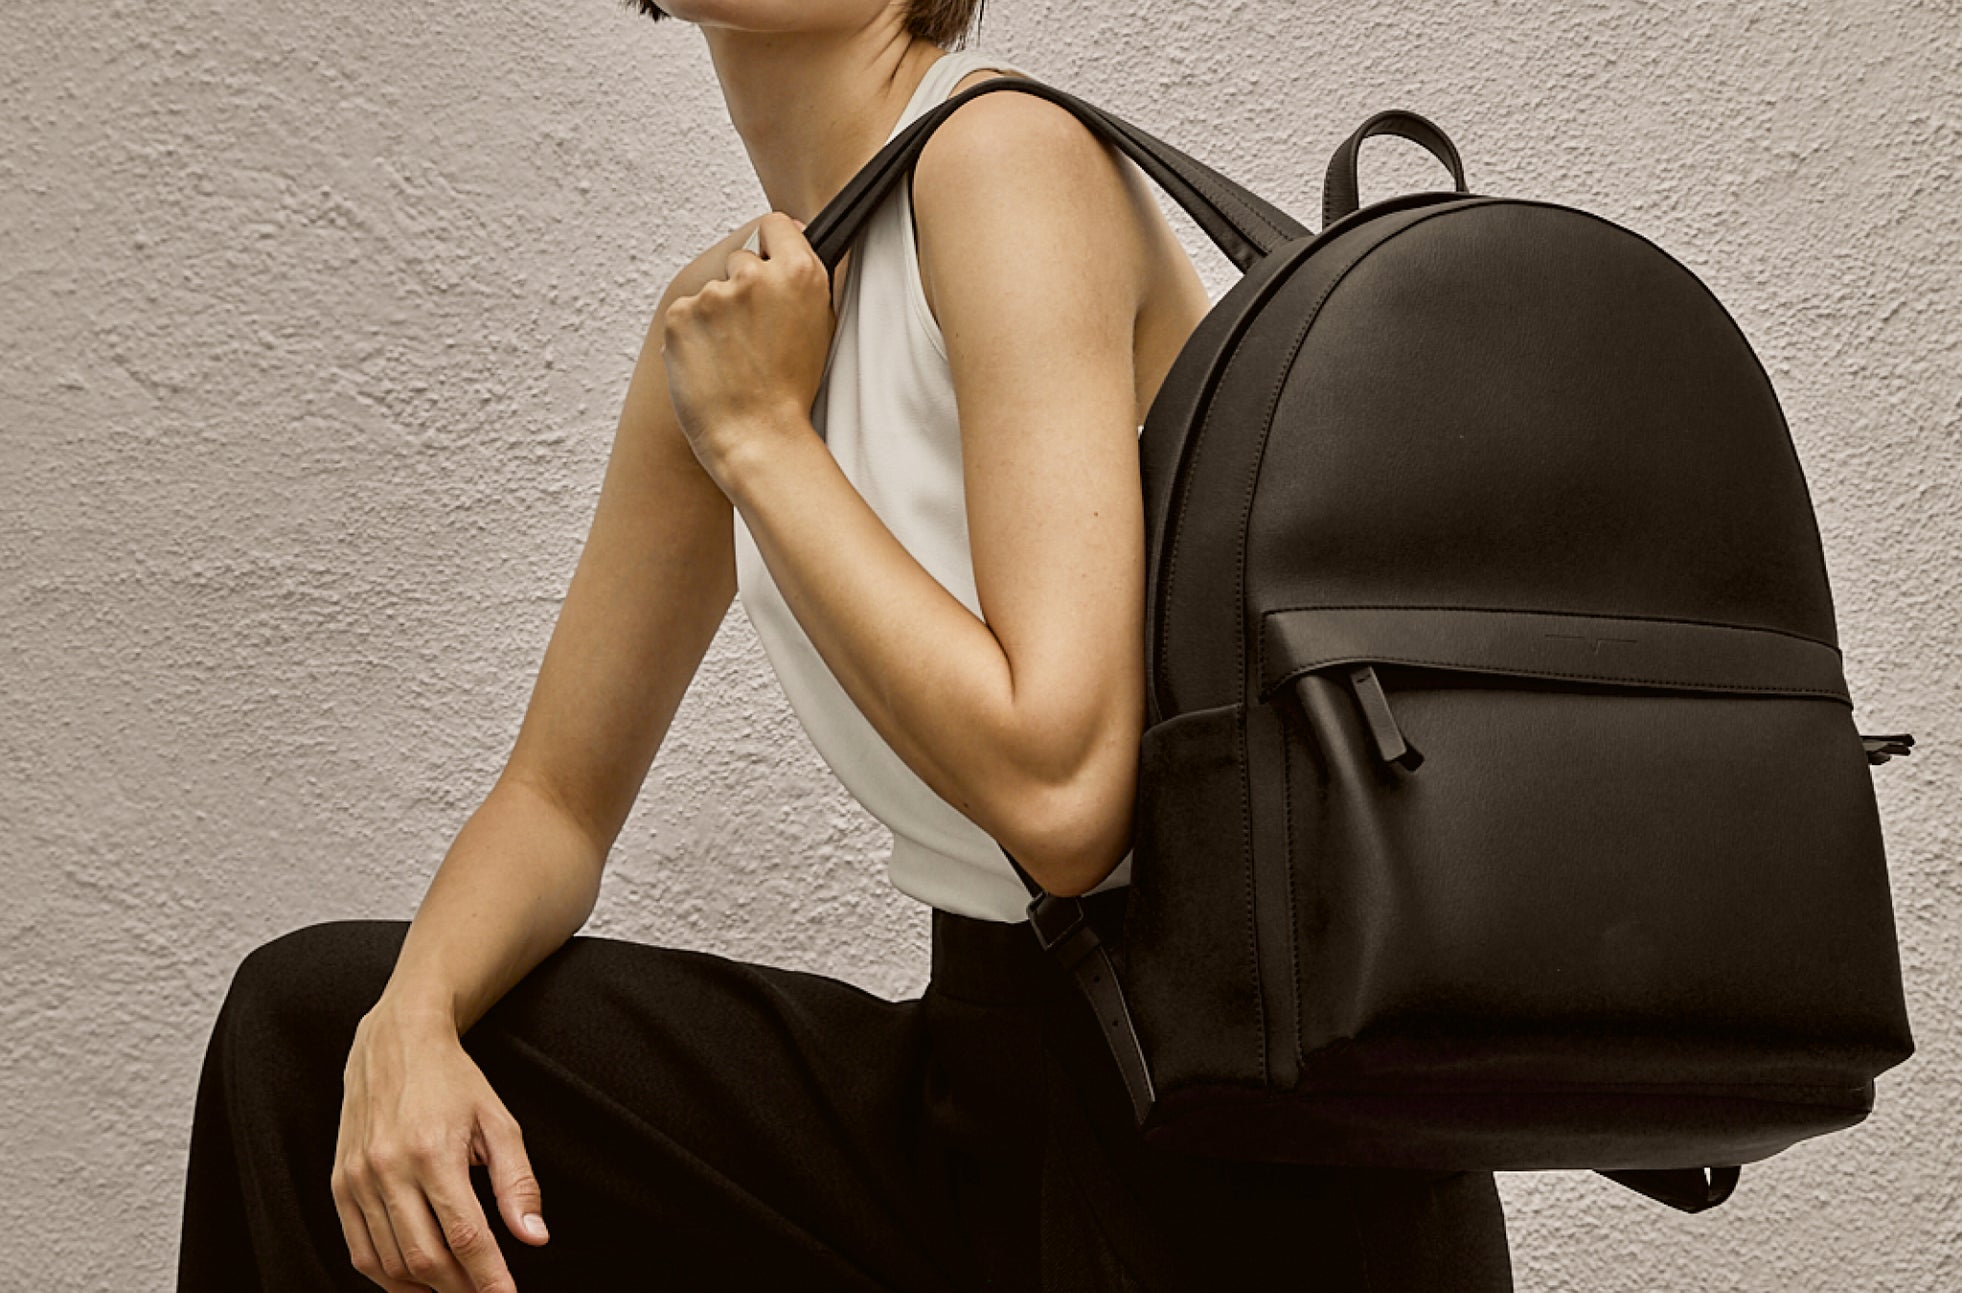 The Classic Backpack in Technik in Taupe and Black image 